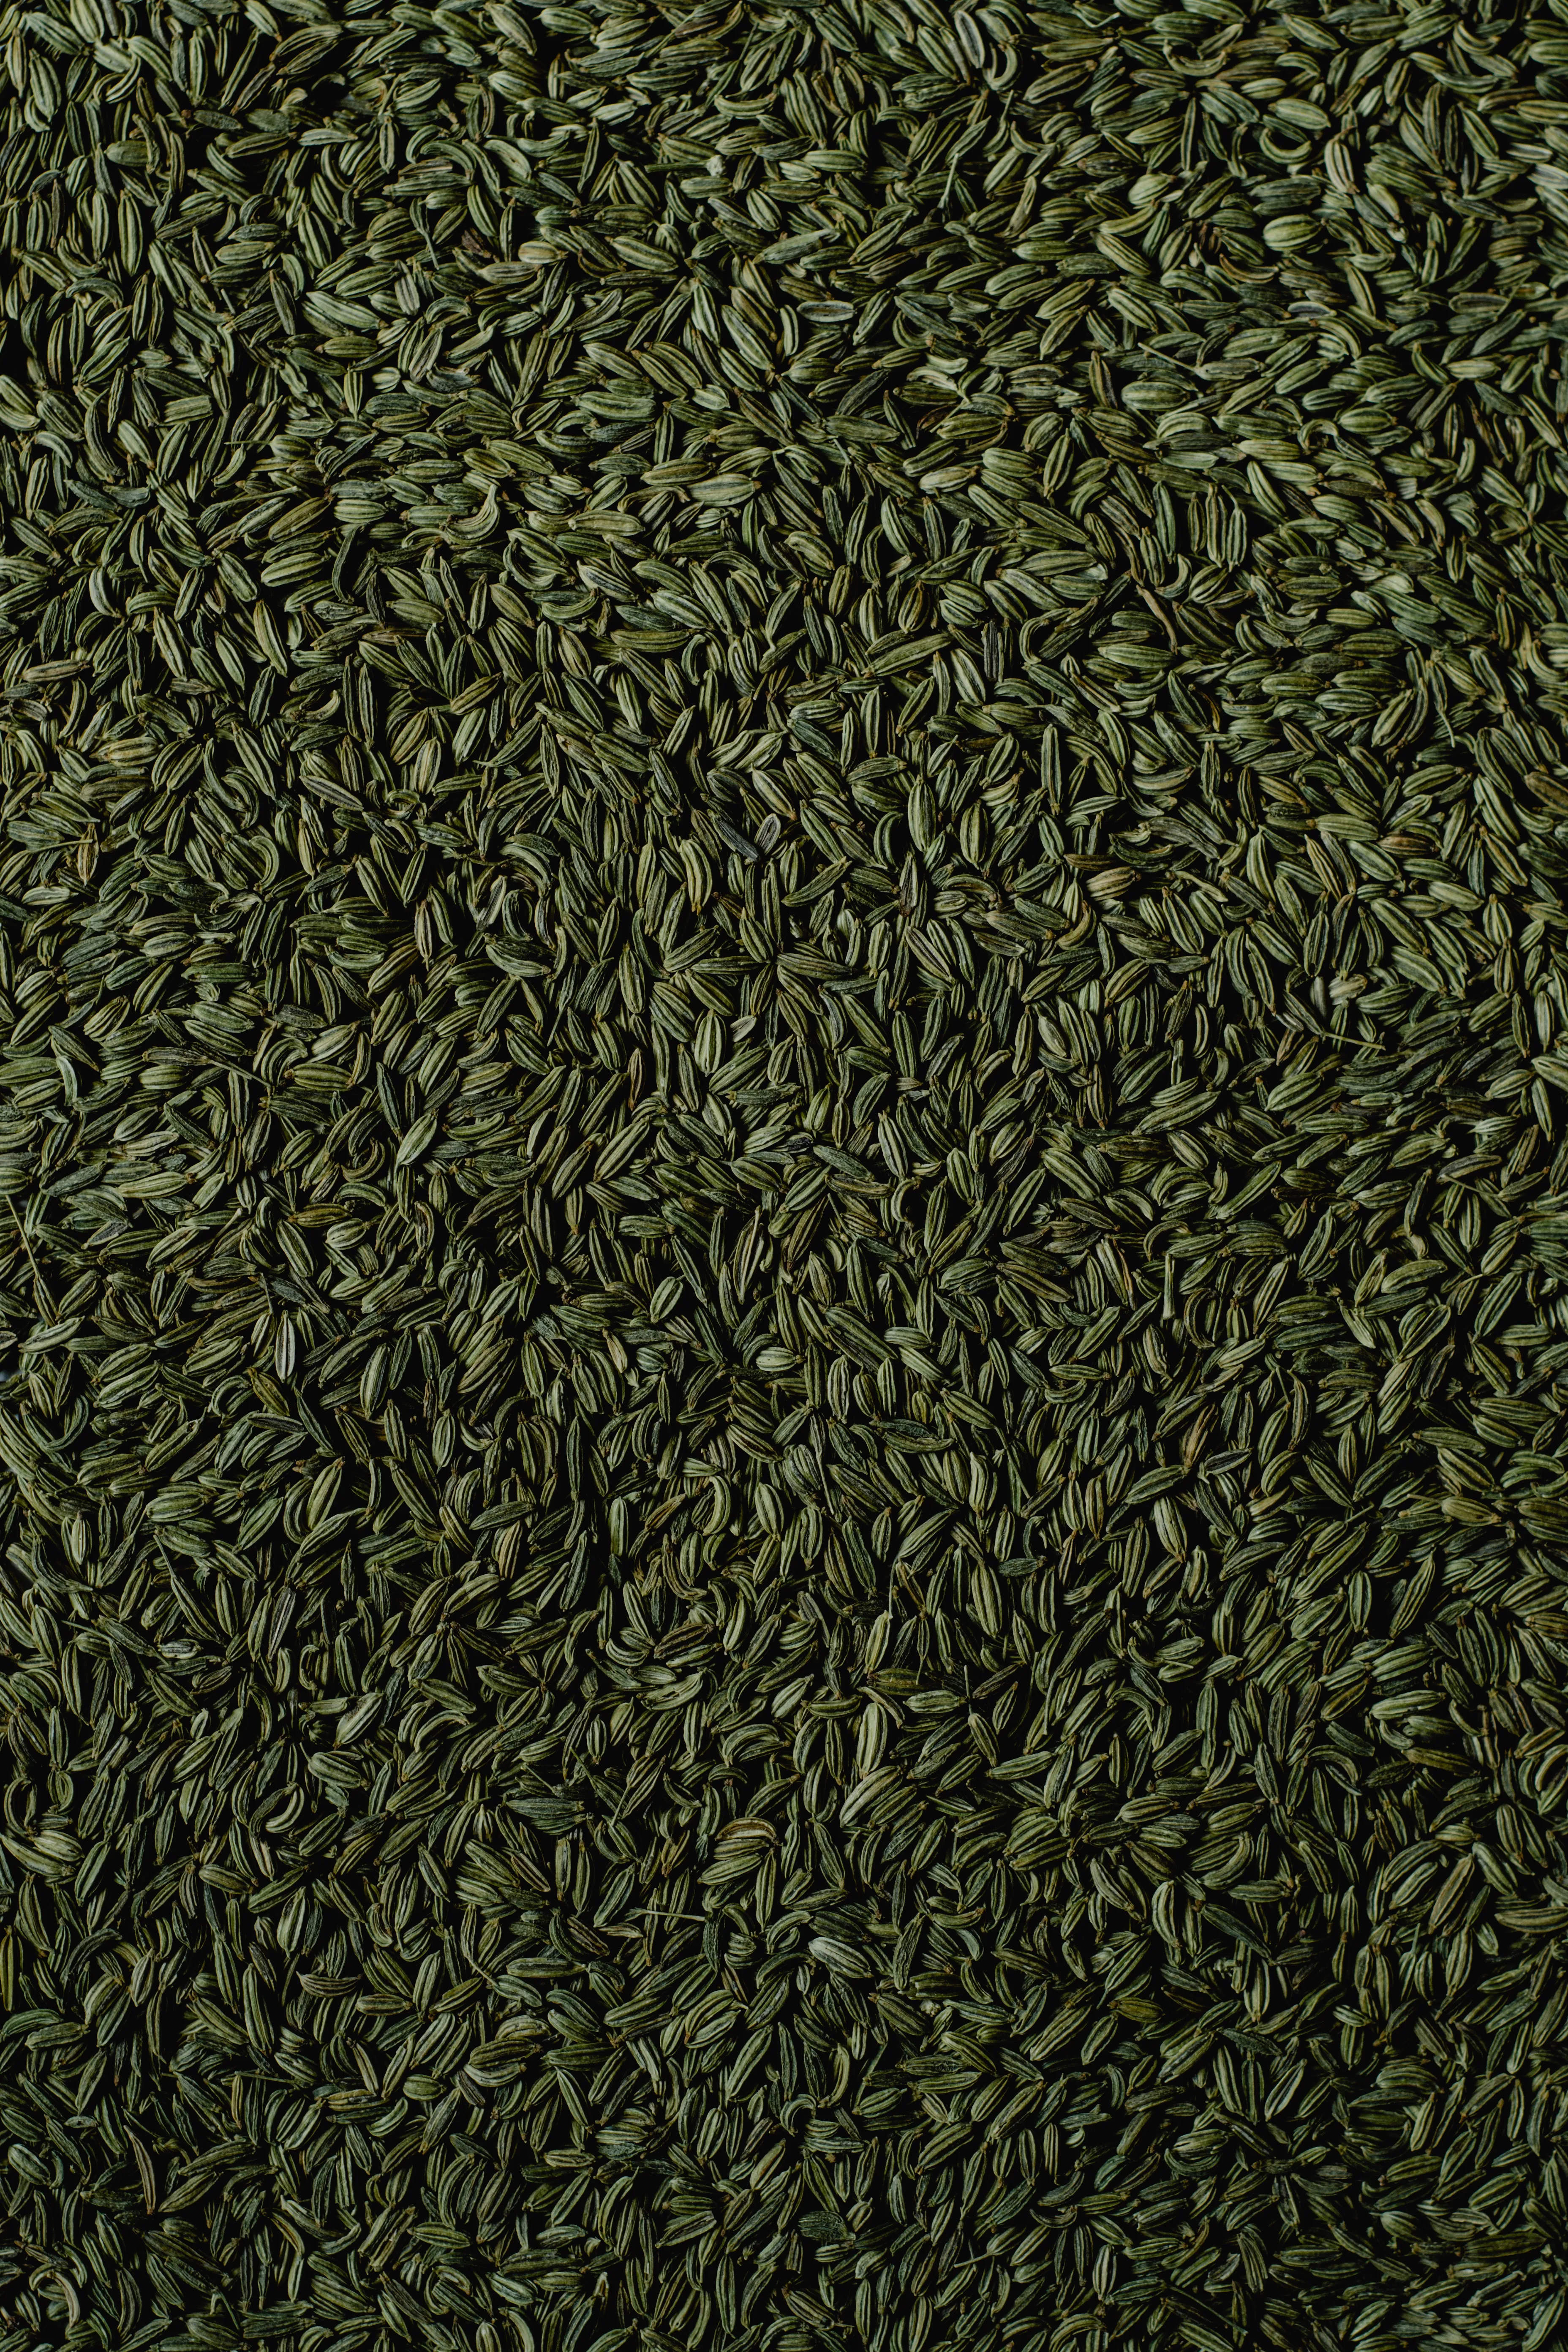 Fennel seeds on a table